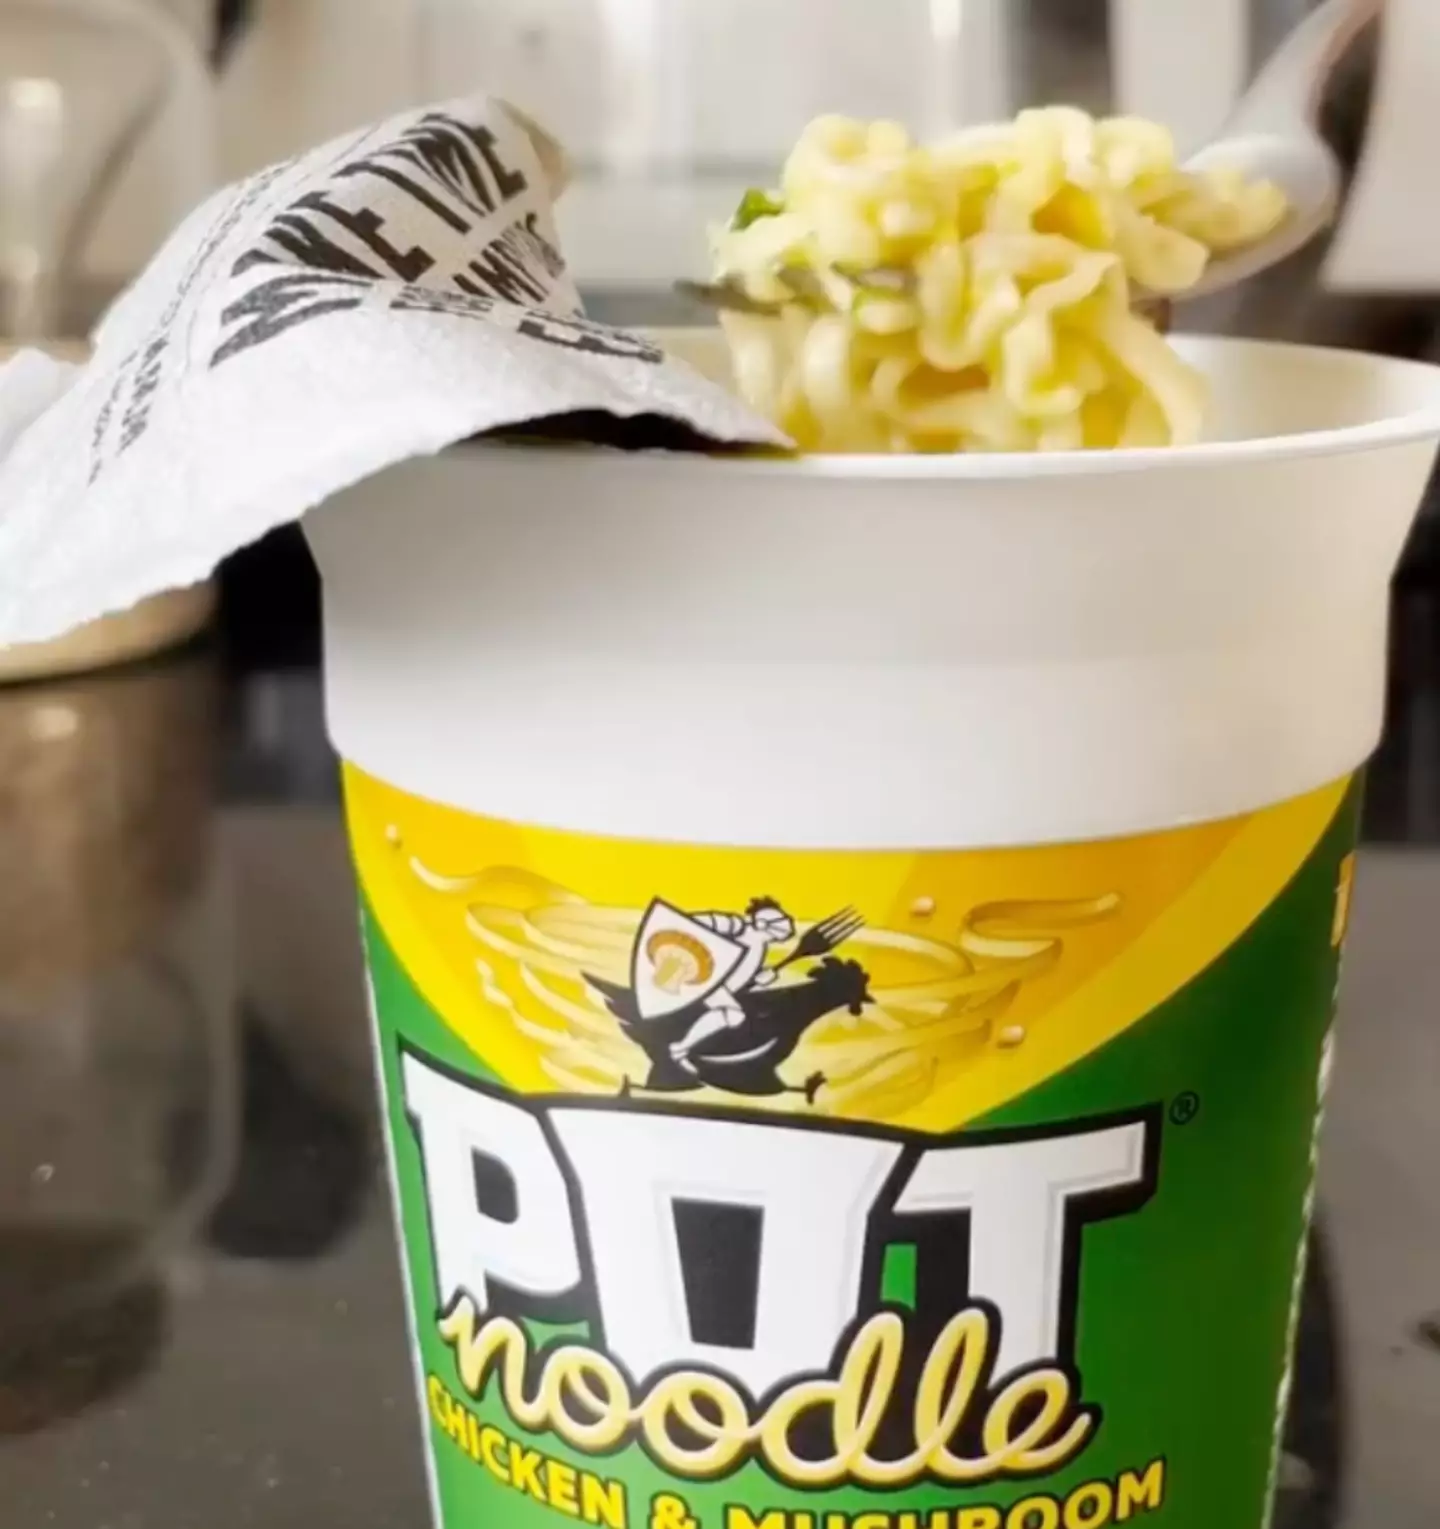 Pot Noodle has suggested an unusual addition.